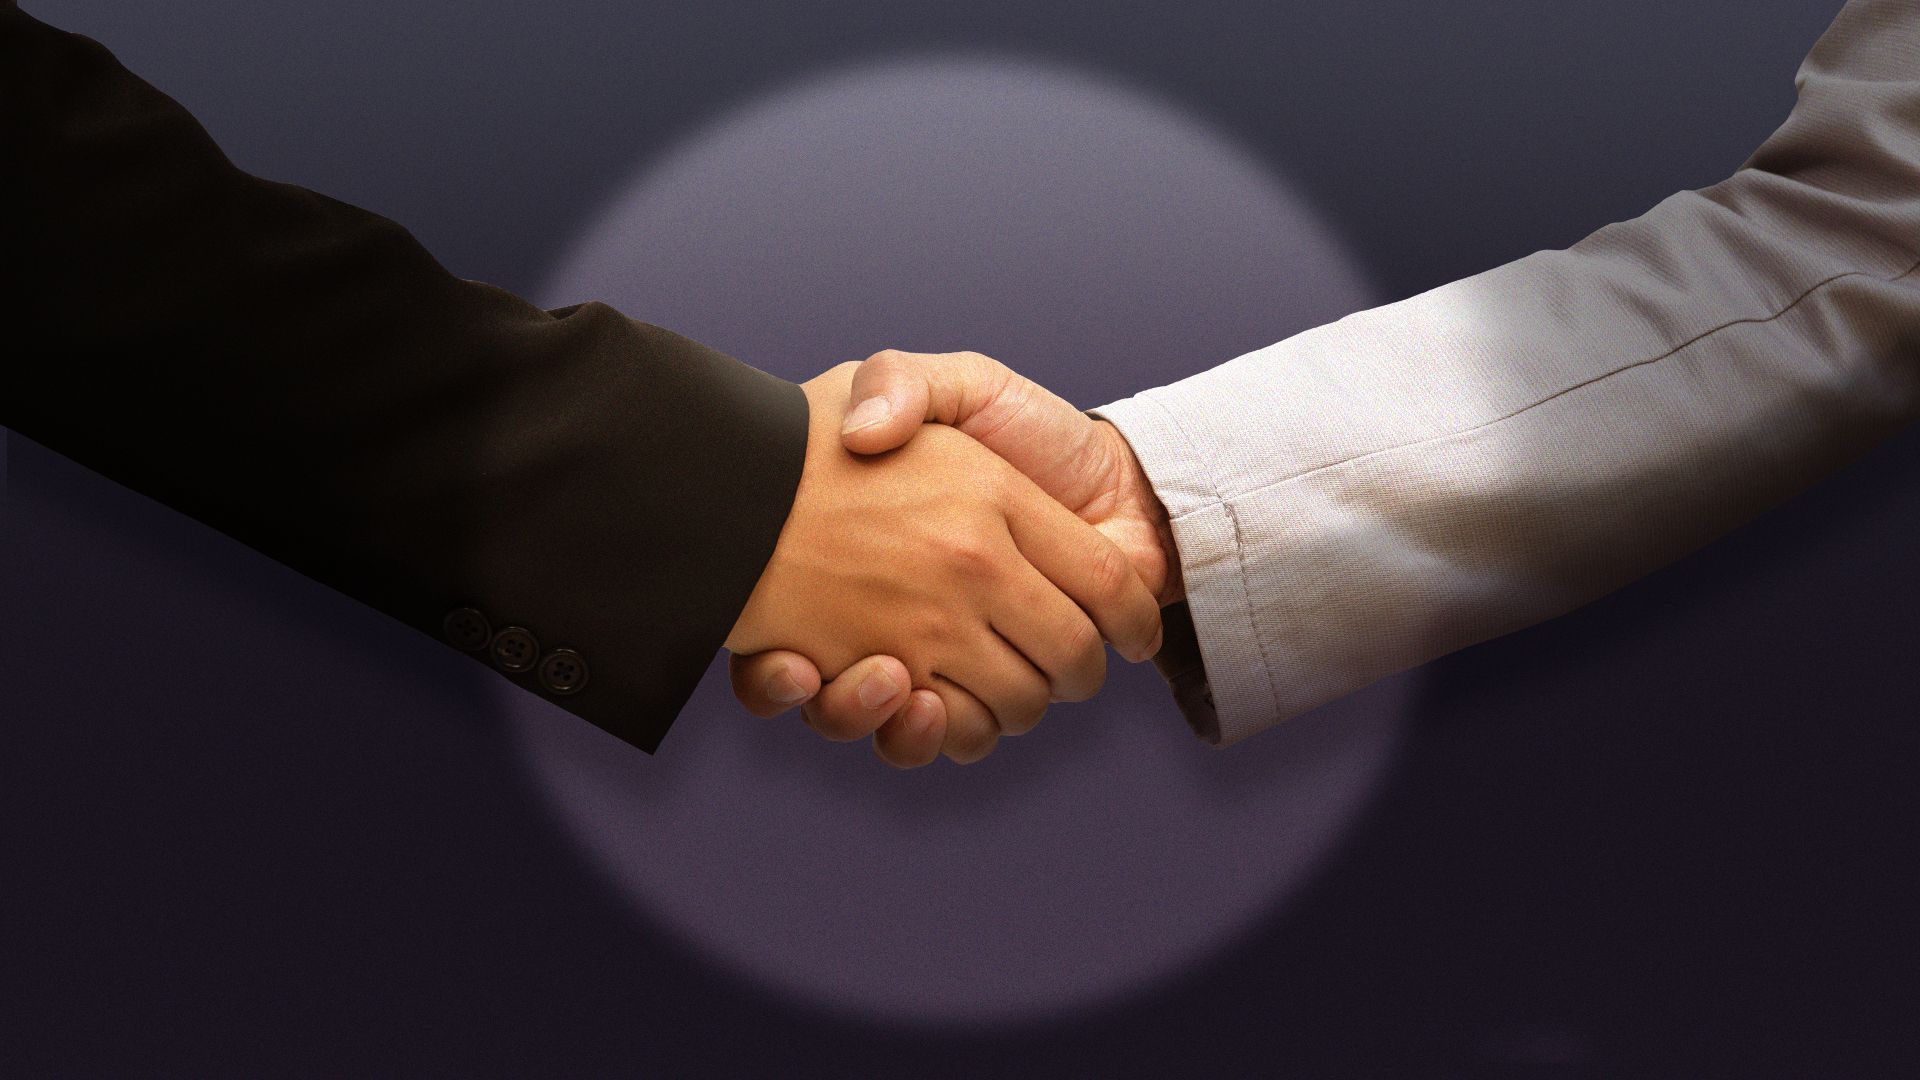 Illustration of a spotlight shining on two people shaking hands.